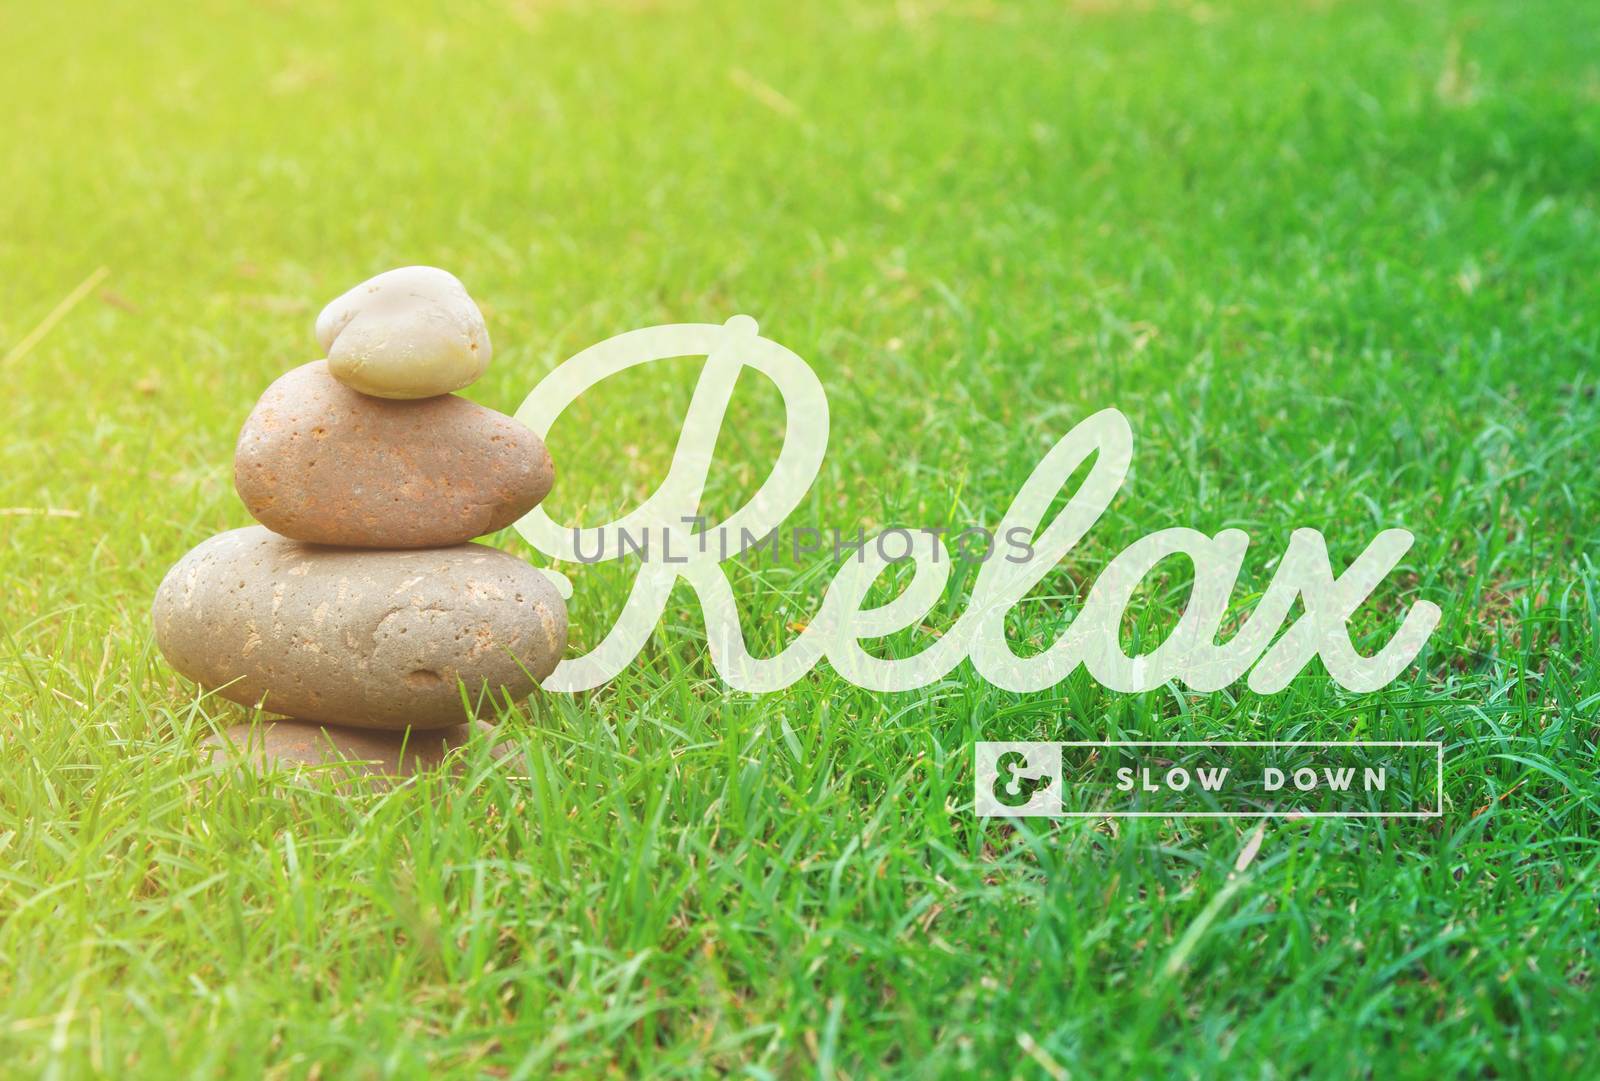 Relax and slow down motivational inspiring quote with balance zen stones and green grass background ideal for spa and wellness poster.